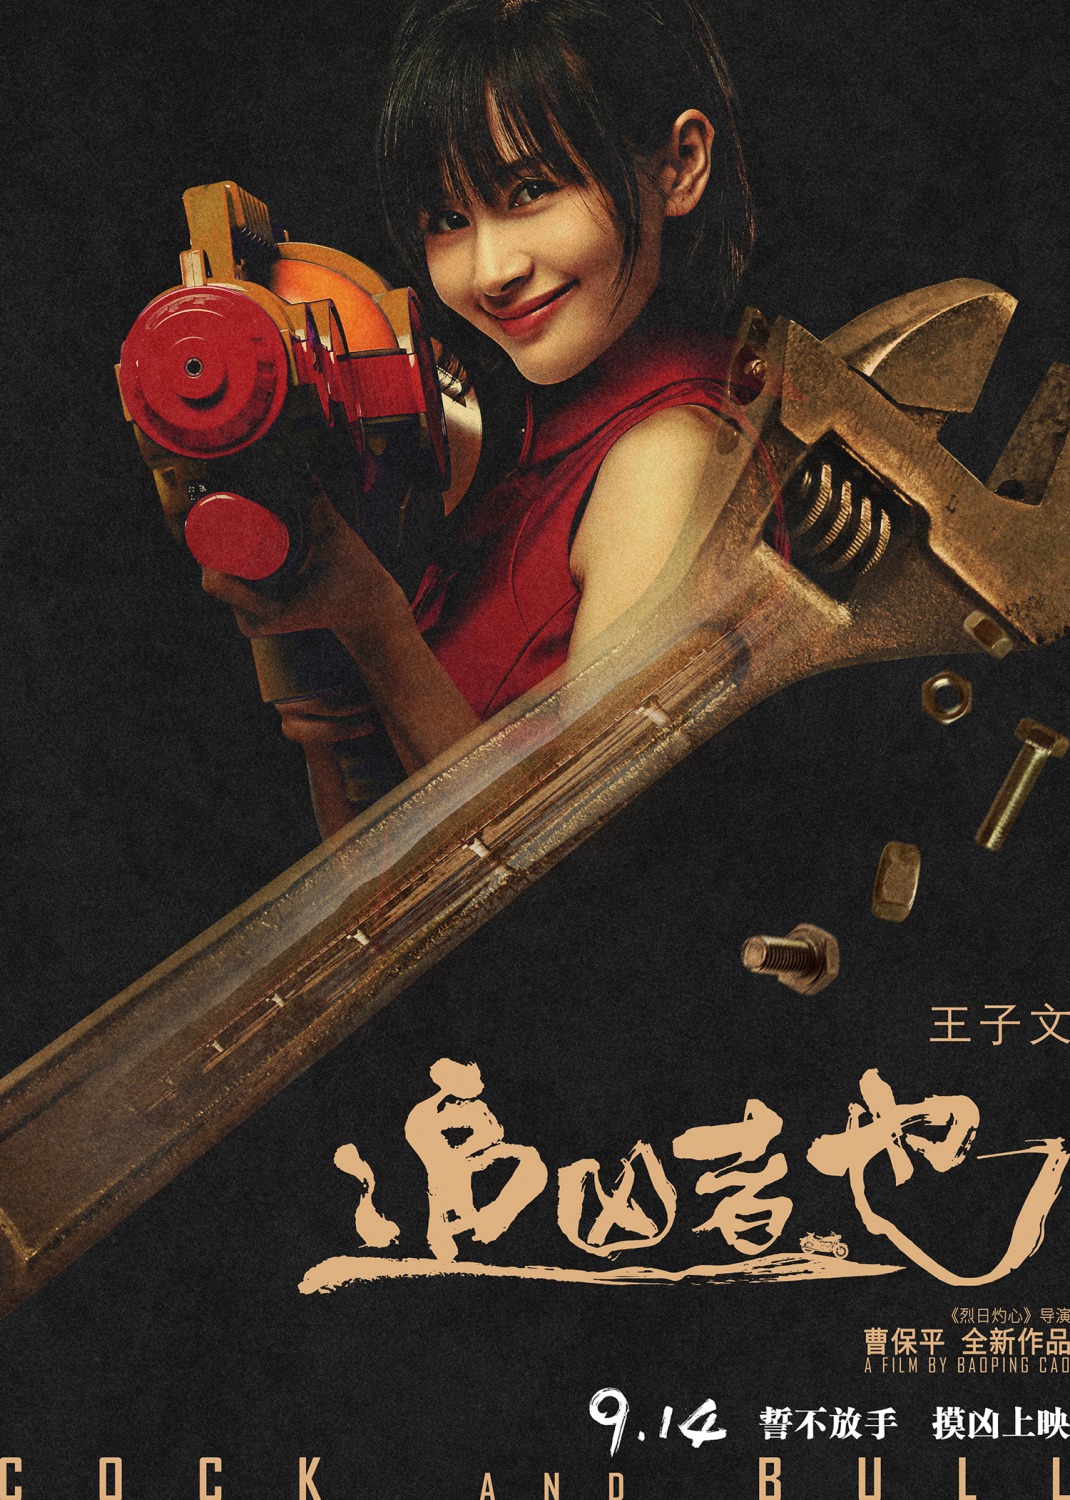 Extra Large Movie Poster Image for Zhui xiong zhe ye (#11 of 16)